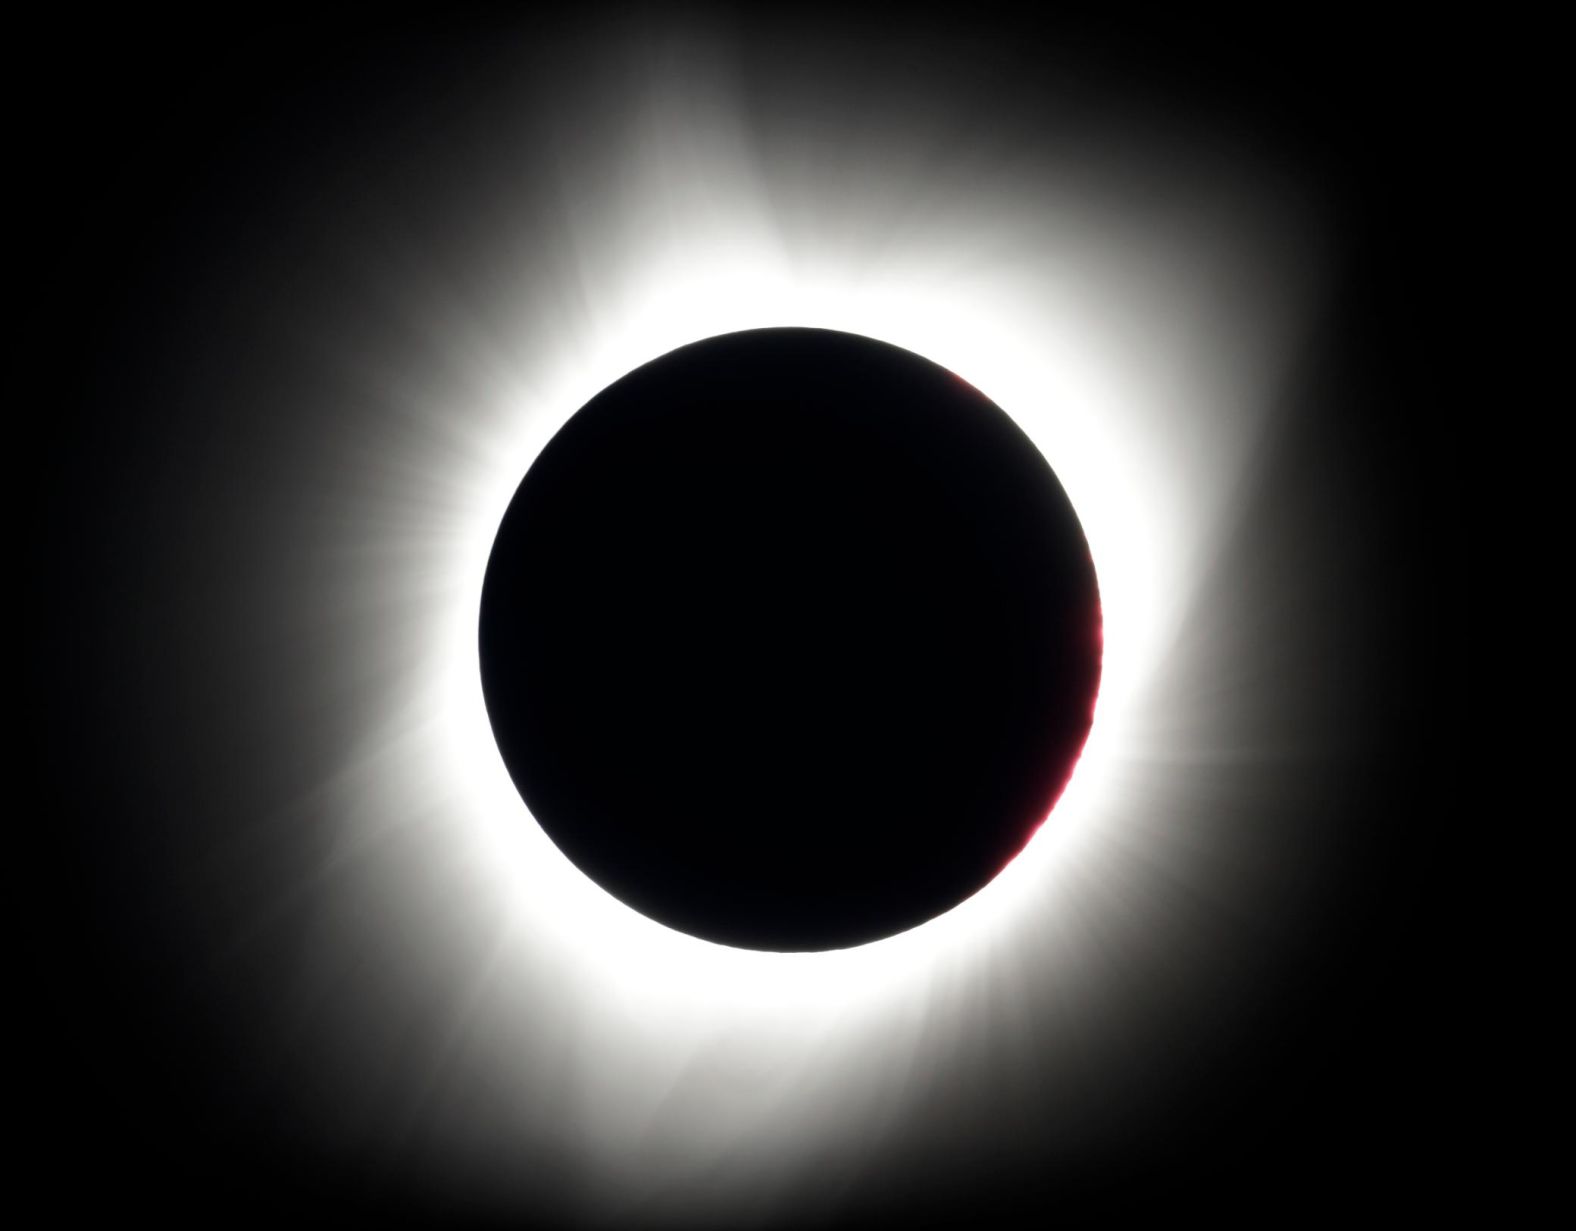 The moon covers the sun during <a href="https://www.cnn.com/interactive/2017/08/us/eclipse-photos/" target="_blank">a total solar eclipse</a> seen near Redmond, Oregon, in August 2017. It was the first total solar eclipse to cross the United States since 1918.